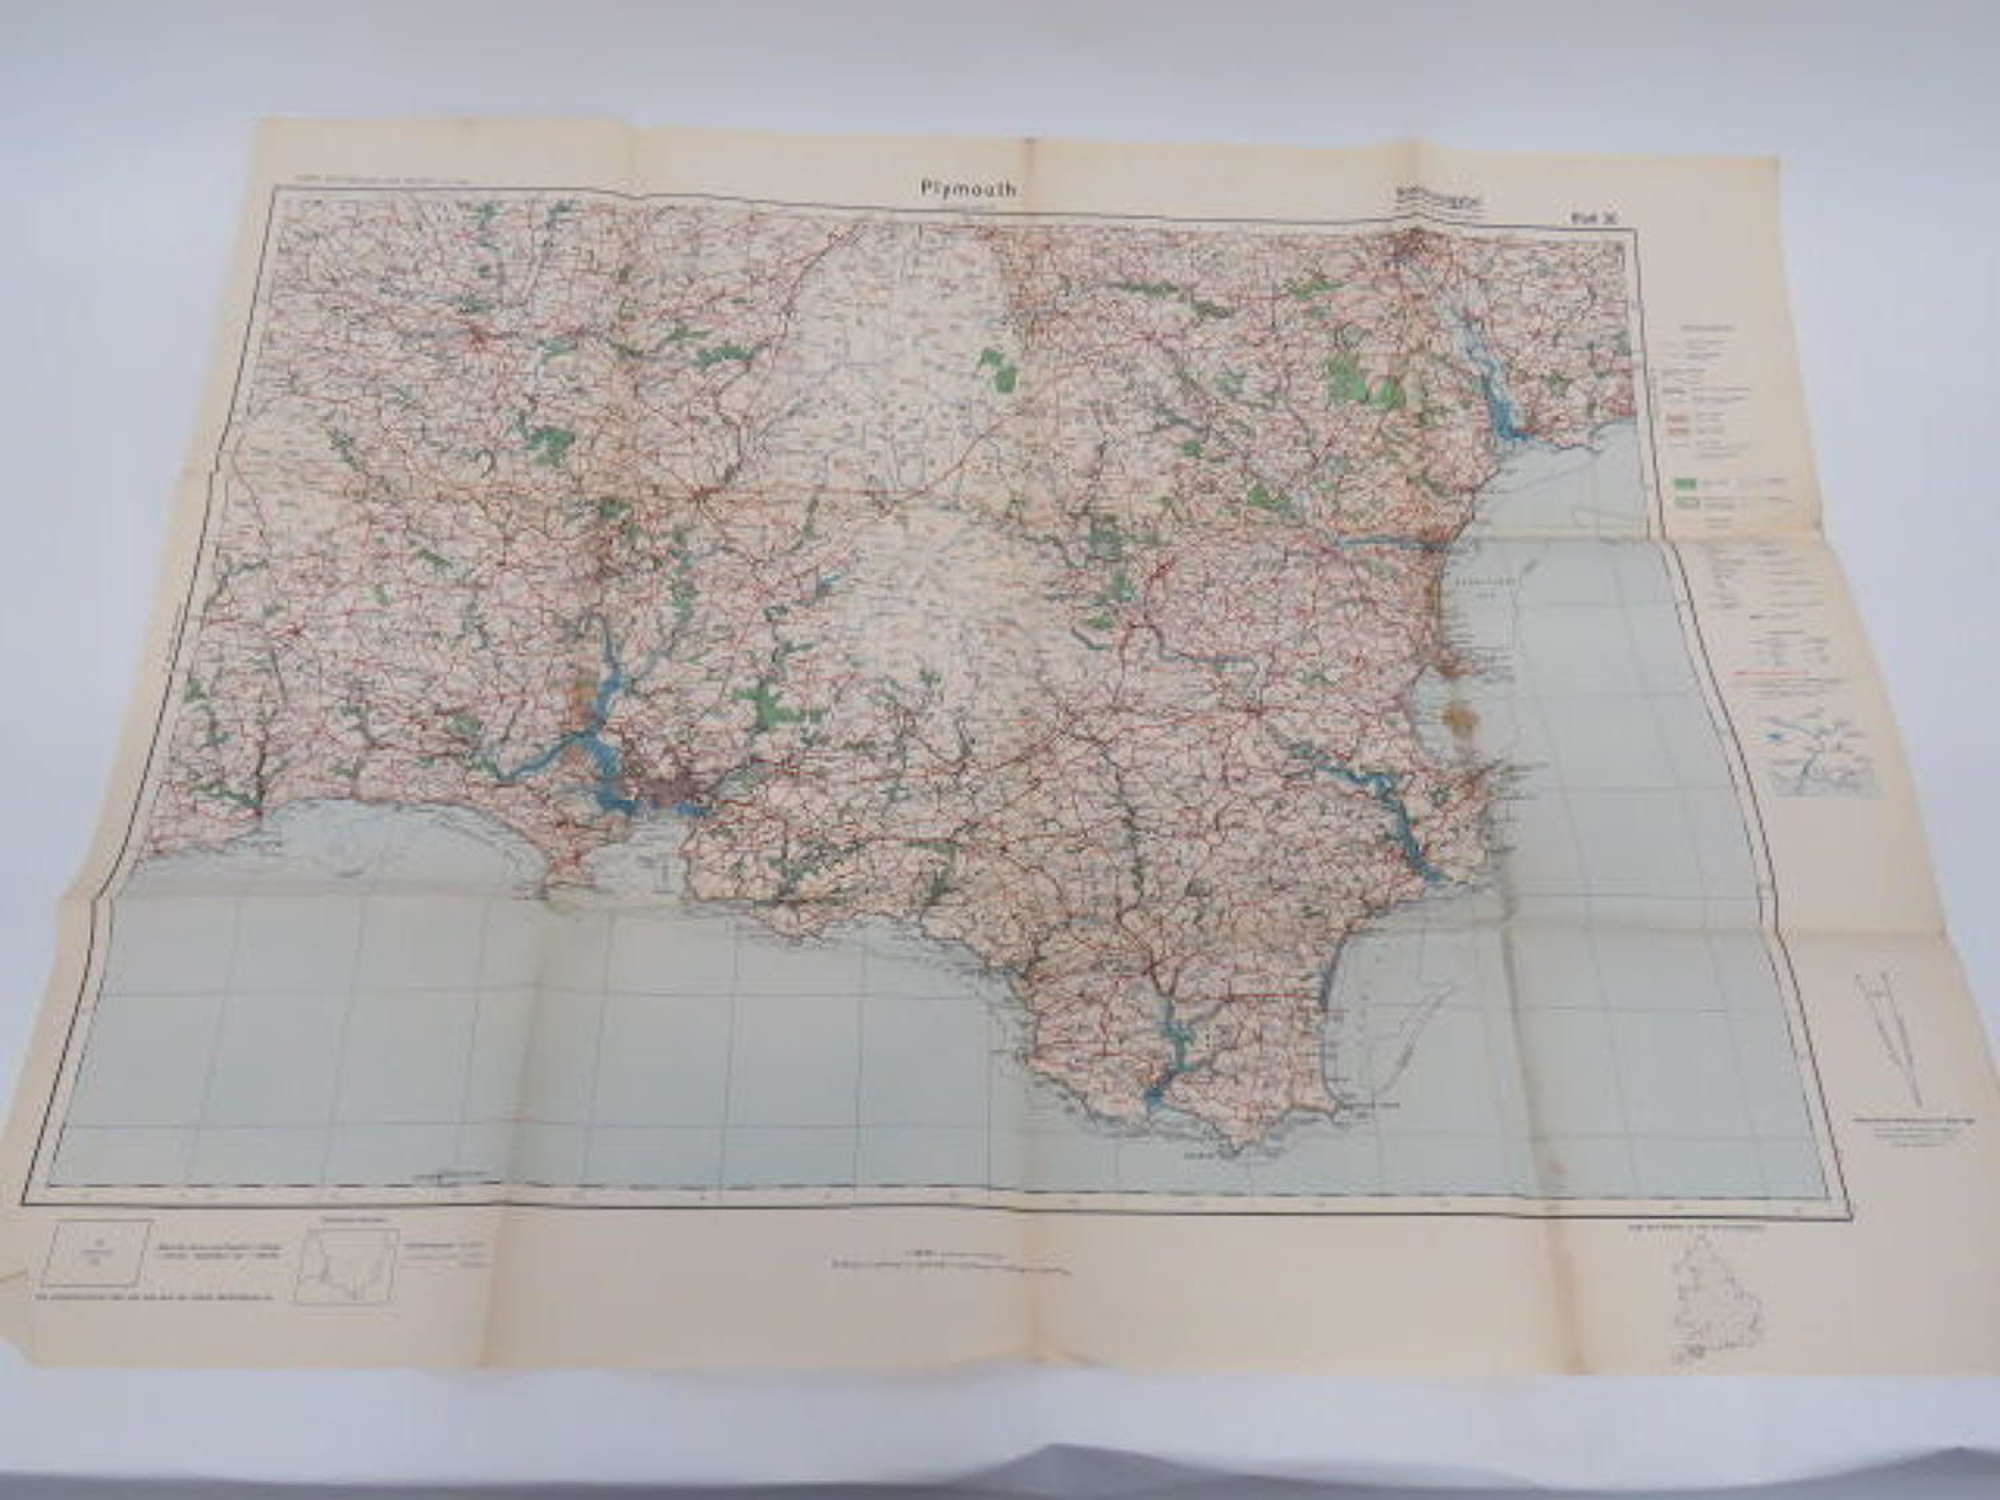 WW 2 German Invasion Map of Plymouth